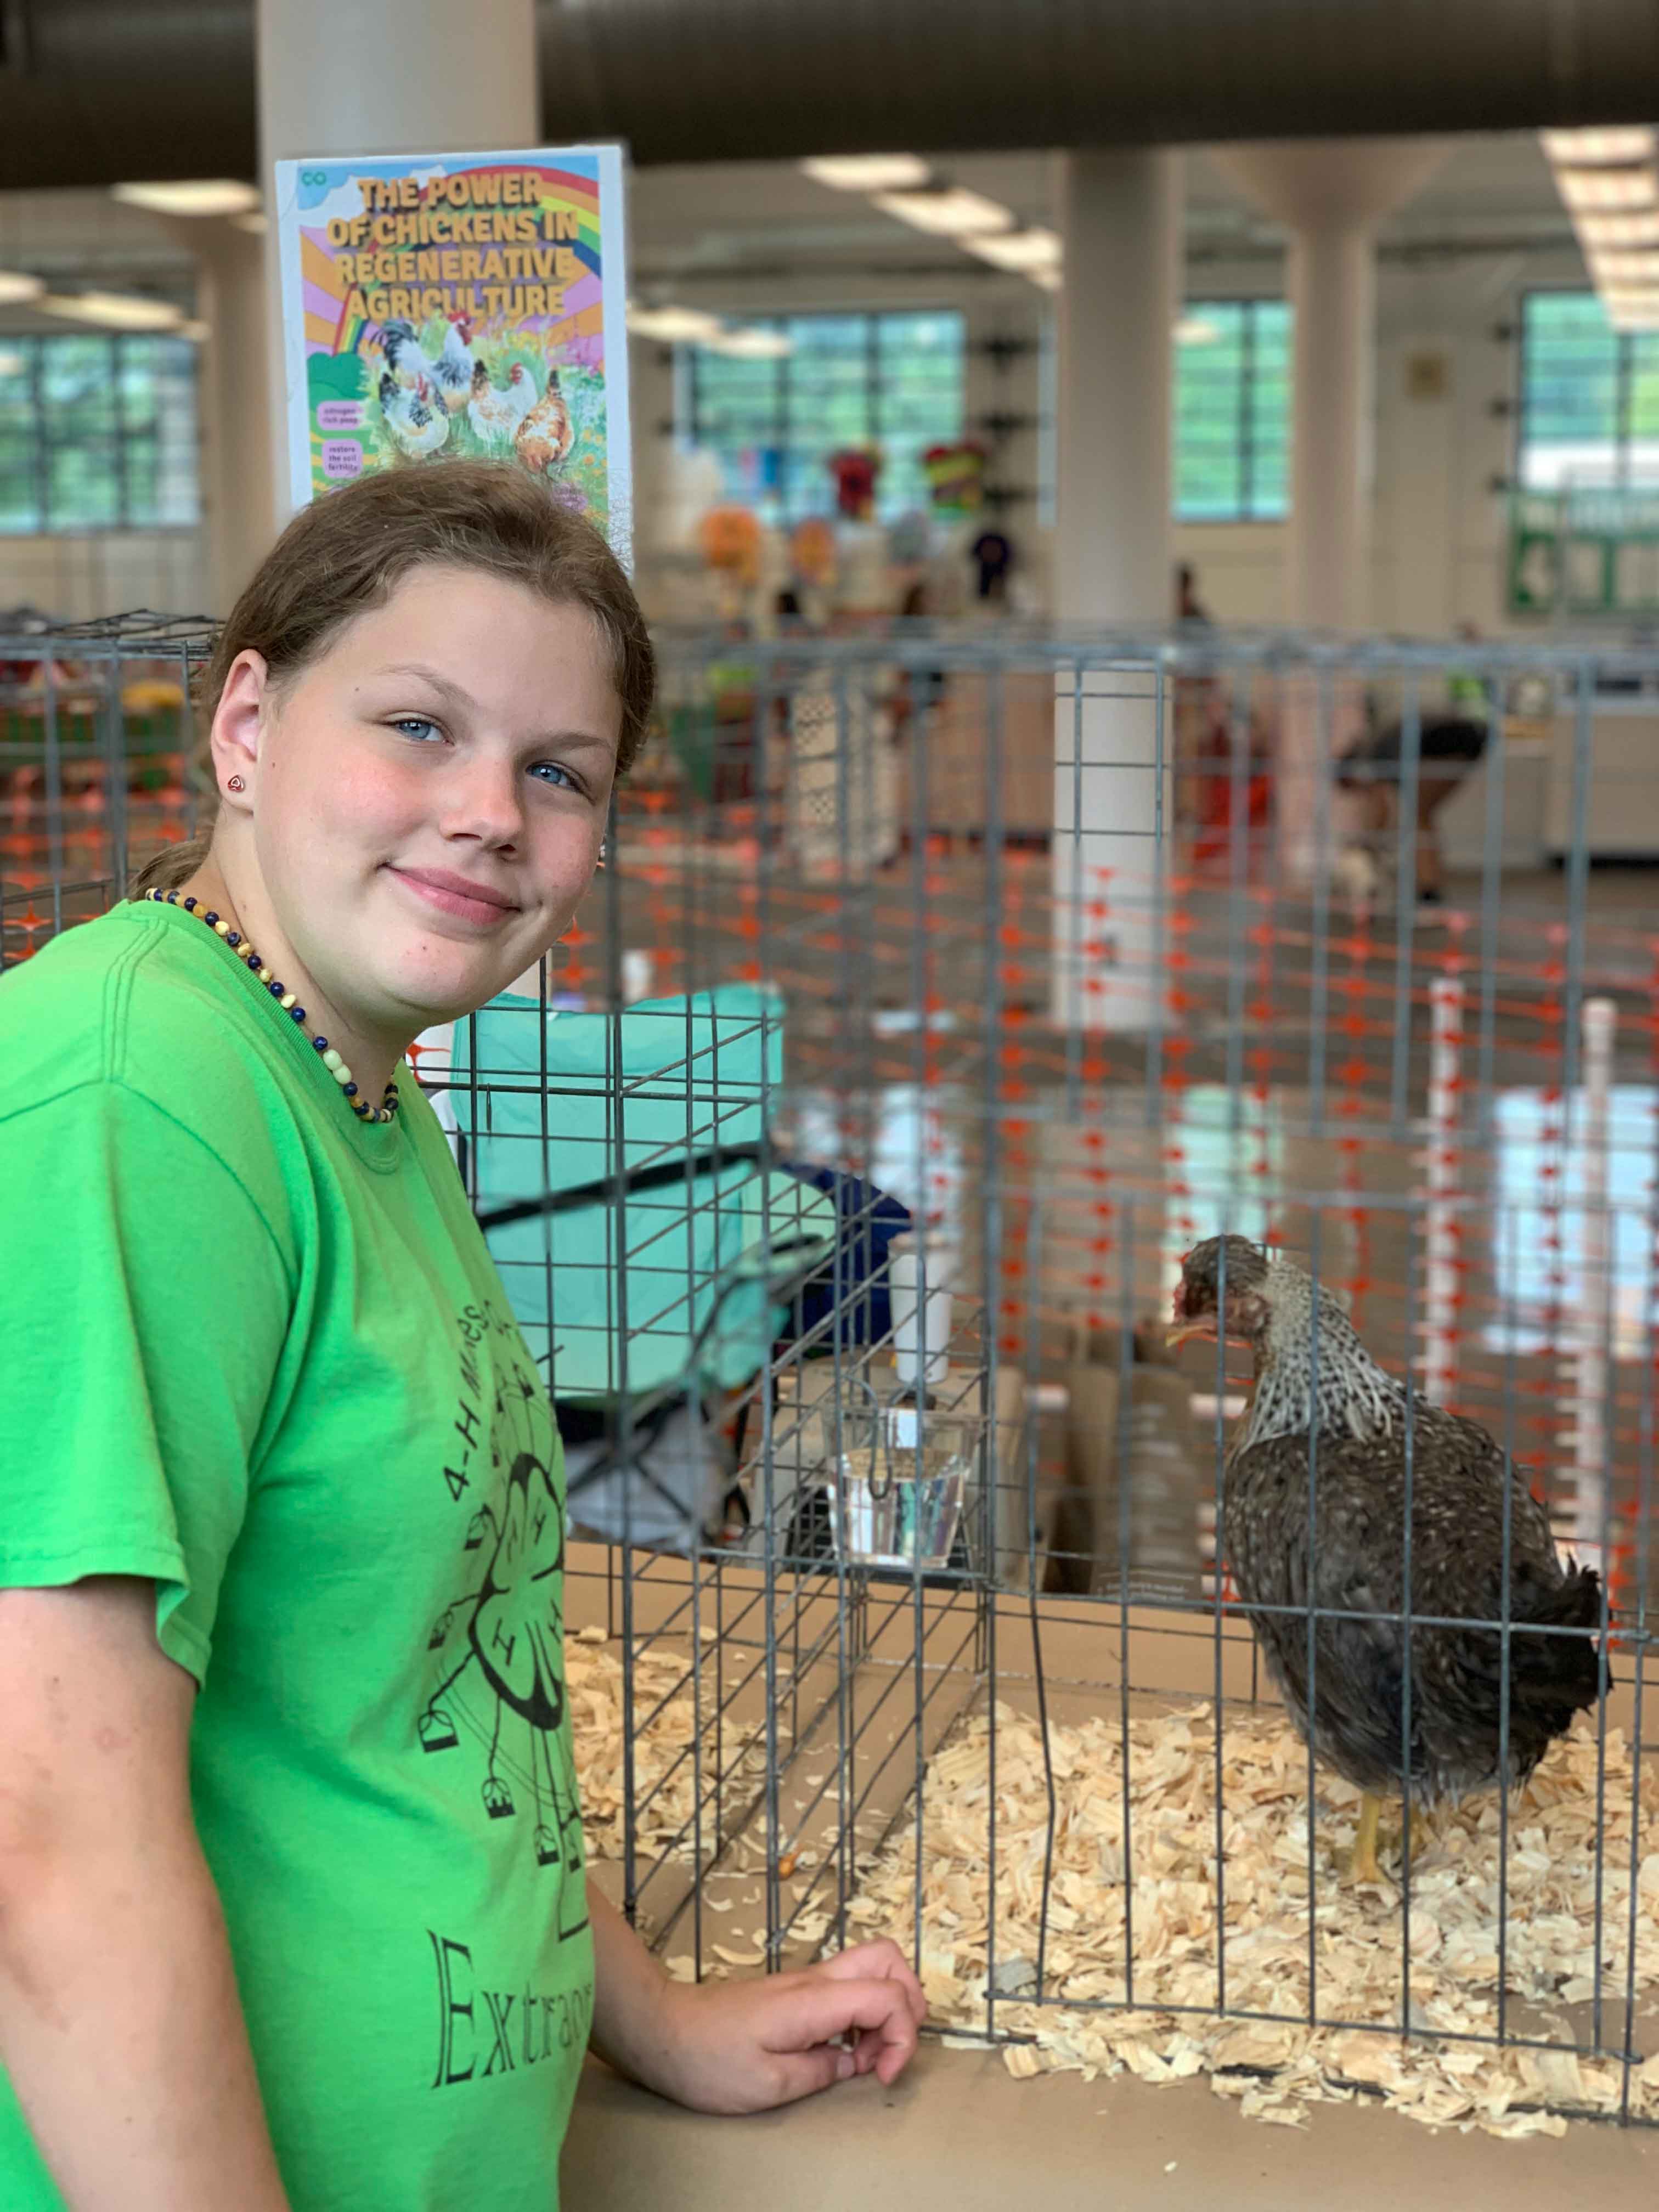 4-H poultry project member with her bird